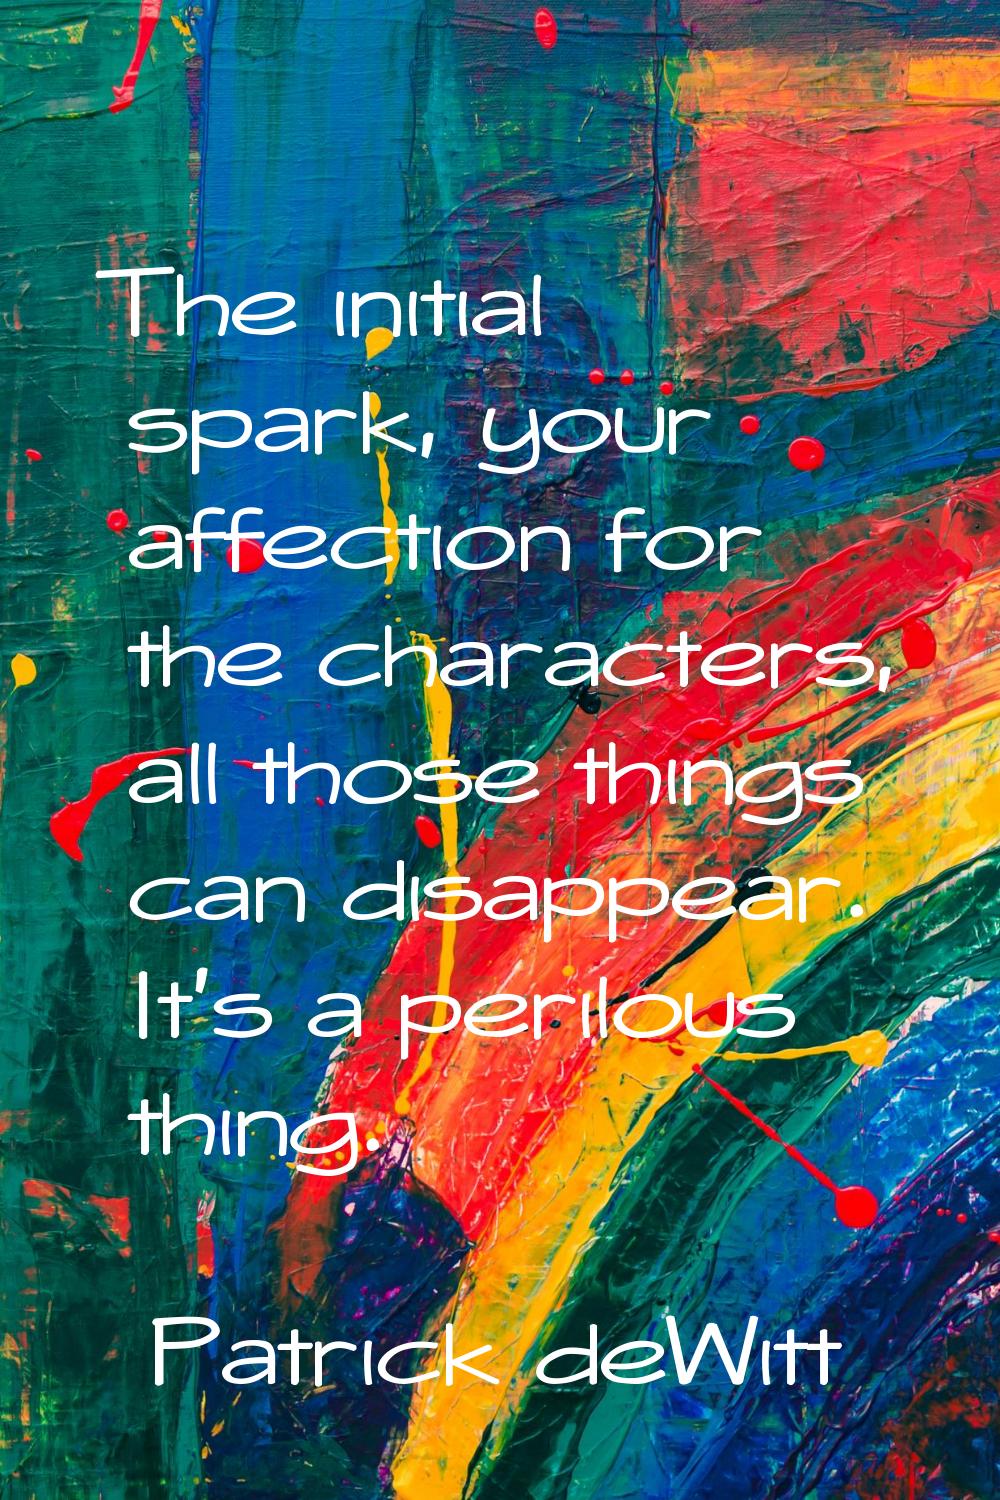 The initial spark, your affection for the characters, all those things can disappear. It's a perilo